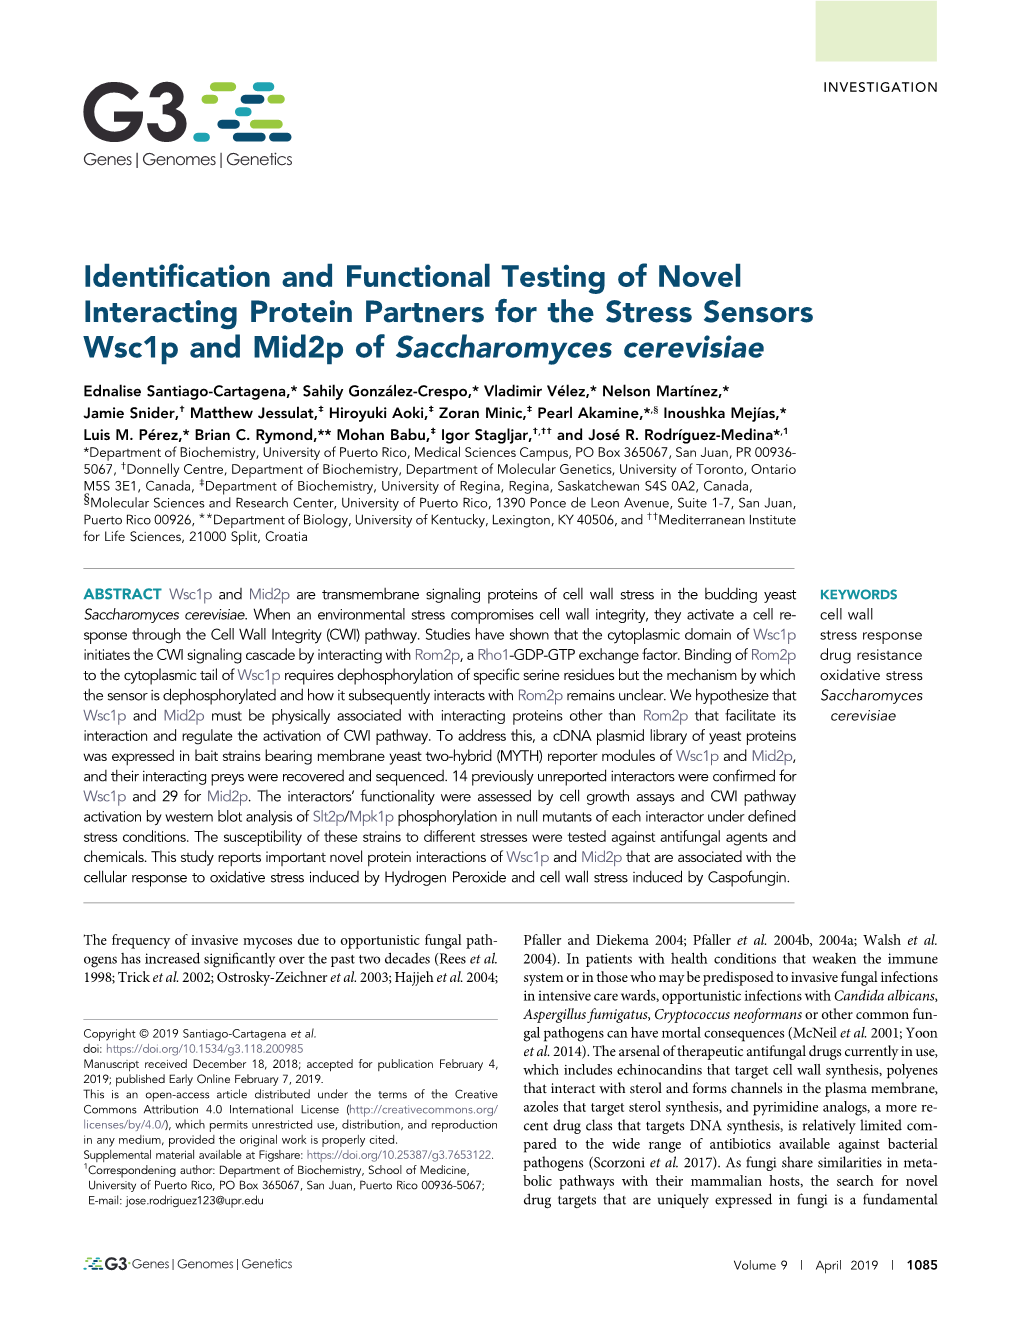 Identification and Functional Testing of Novel Interacting Protein Partners for the Stress Sensors Wsc1p and Mid2p of Saccharomy